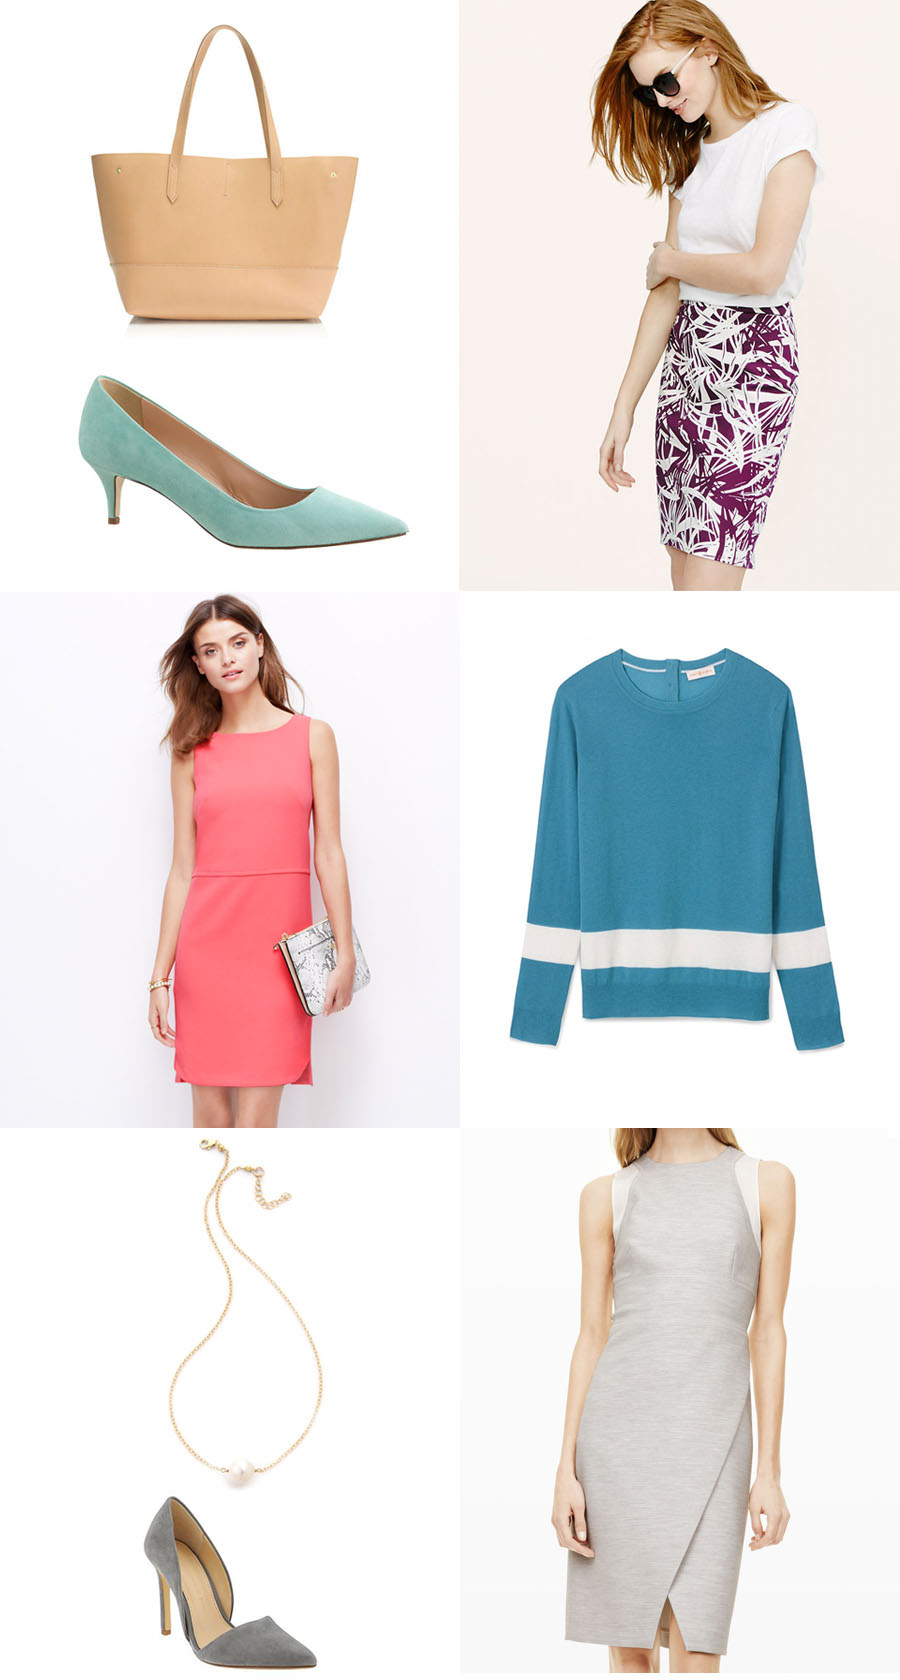 First Row: tote bag, suede kitten heels, palm splashed pencil skirt Second Row: rounded-hem shift dress, cashmere sweater   Third Row: pearl necklace, d'orsay pump, sheath dress with wrap skirt